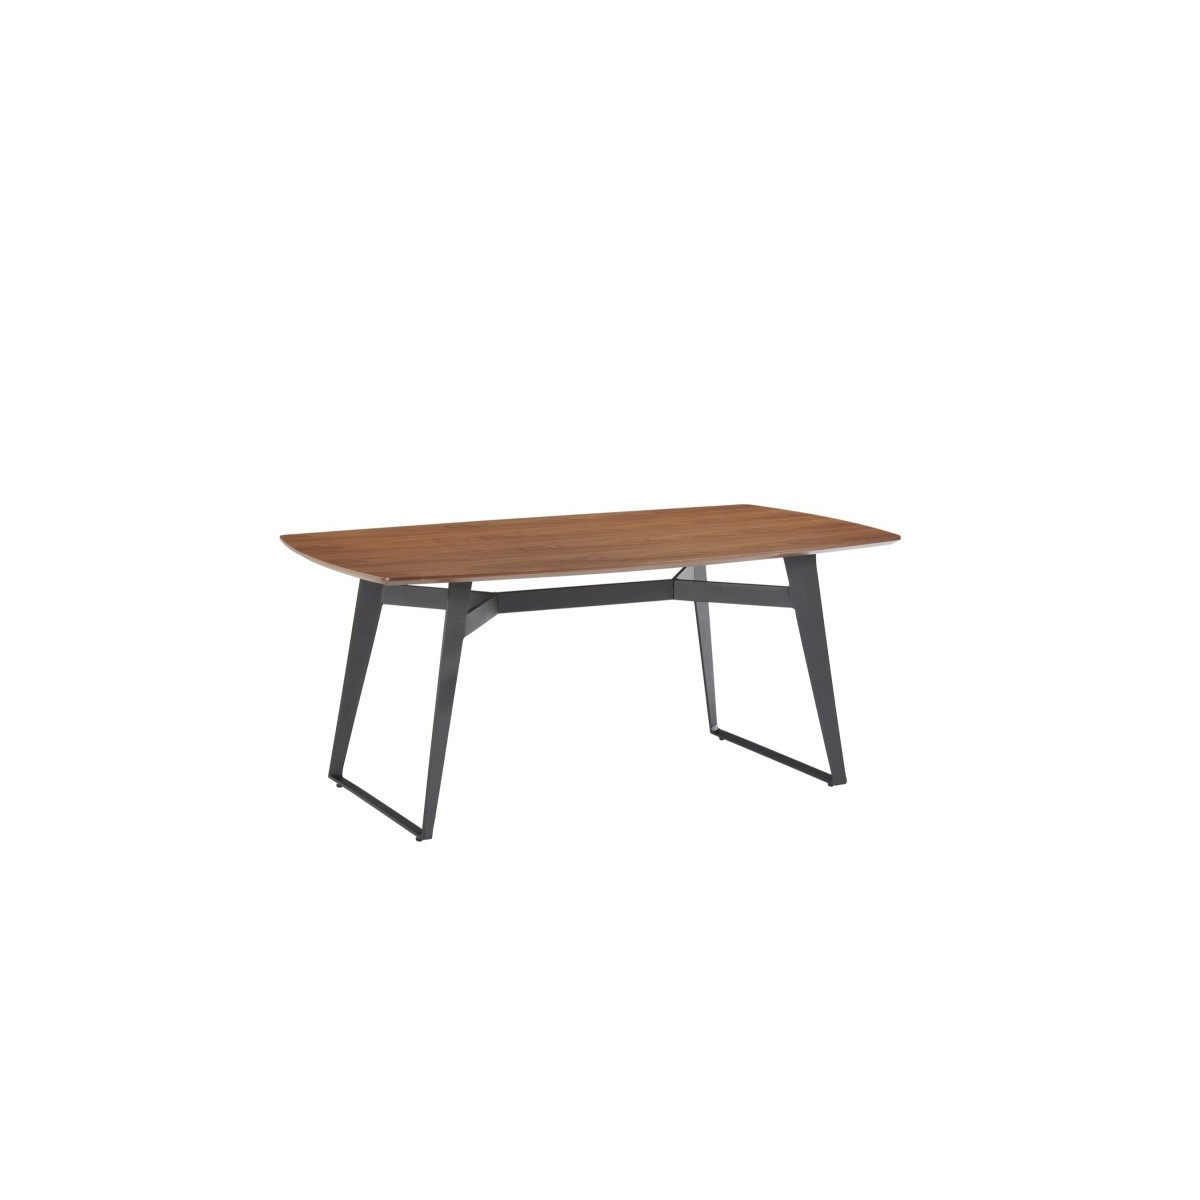 Contemporary Dining Table And Vintage Mael In Wood And Metal 180cmx90cmx77 5cm Black Walnut Amp Story 4233